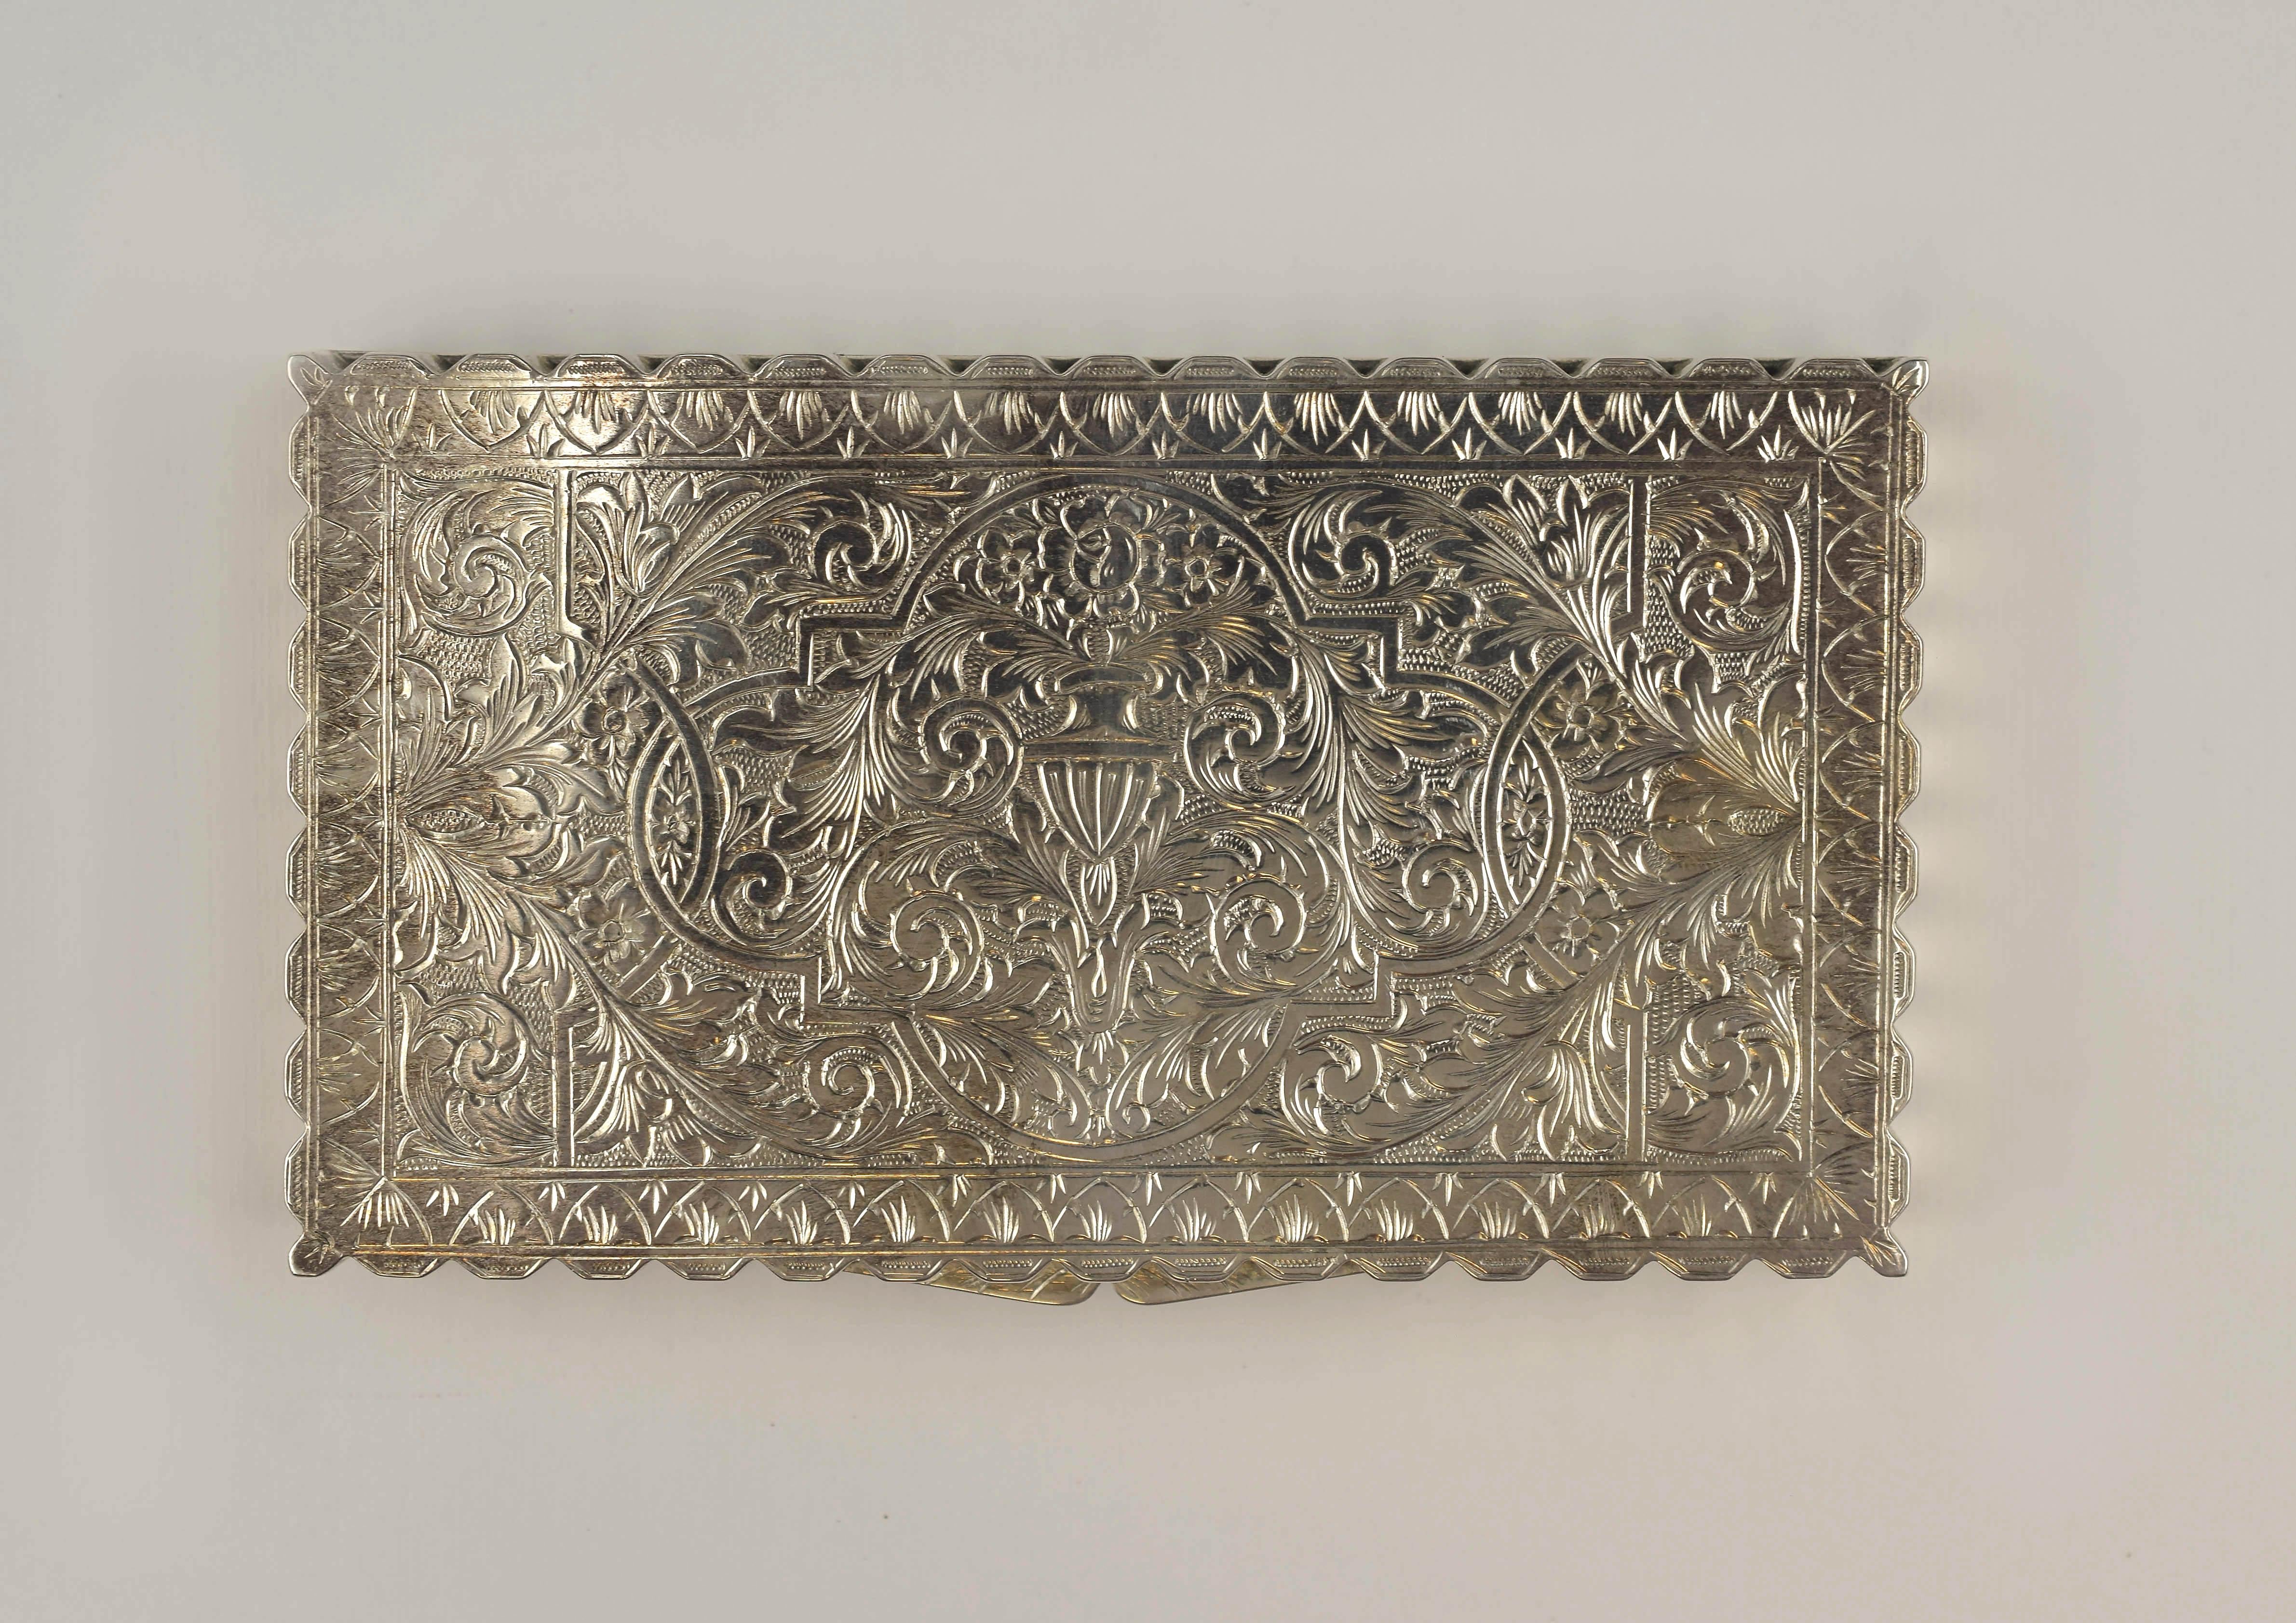 Vintage silver box is a precious decorative object realized in 20th century.

Very elegant box in silver, made at the beginning of 1900s.

Finely decorated on the top with a very elegant chiseling decoration.

In good conditions.